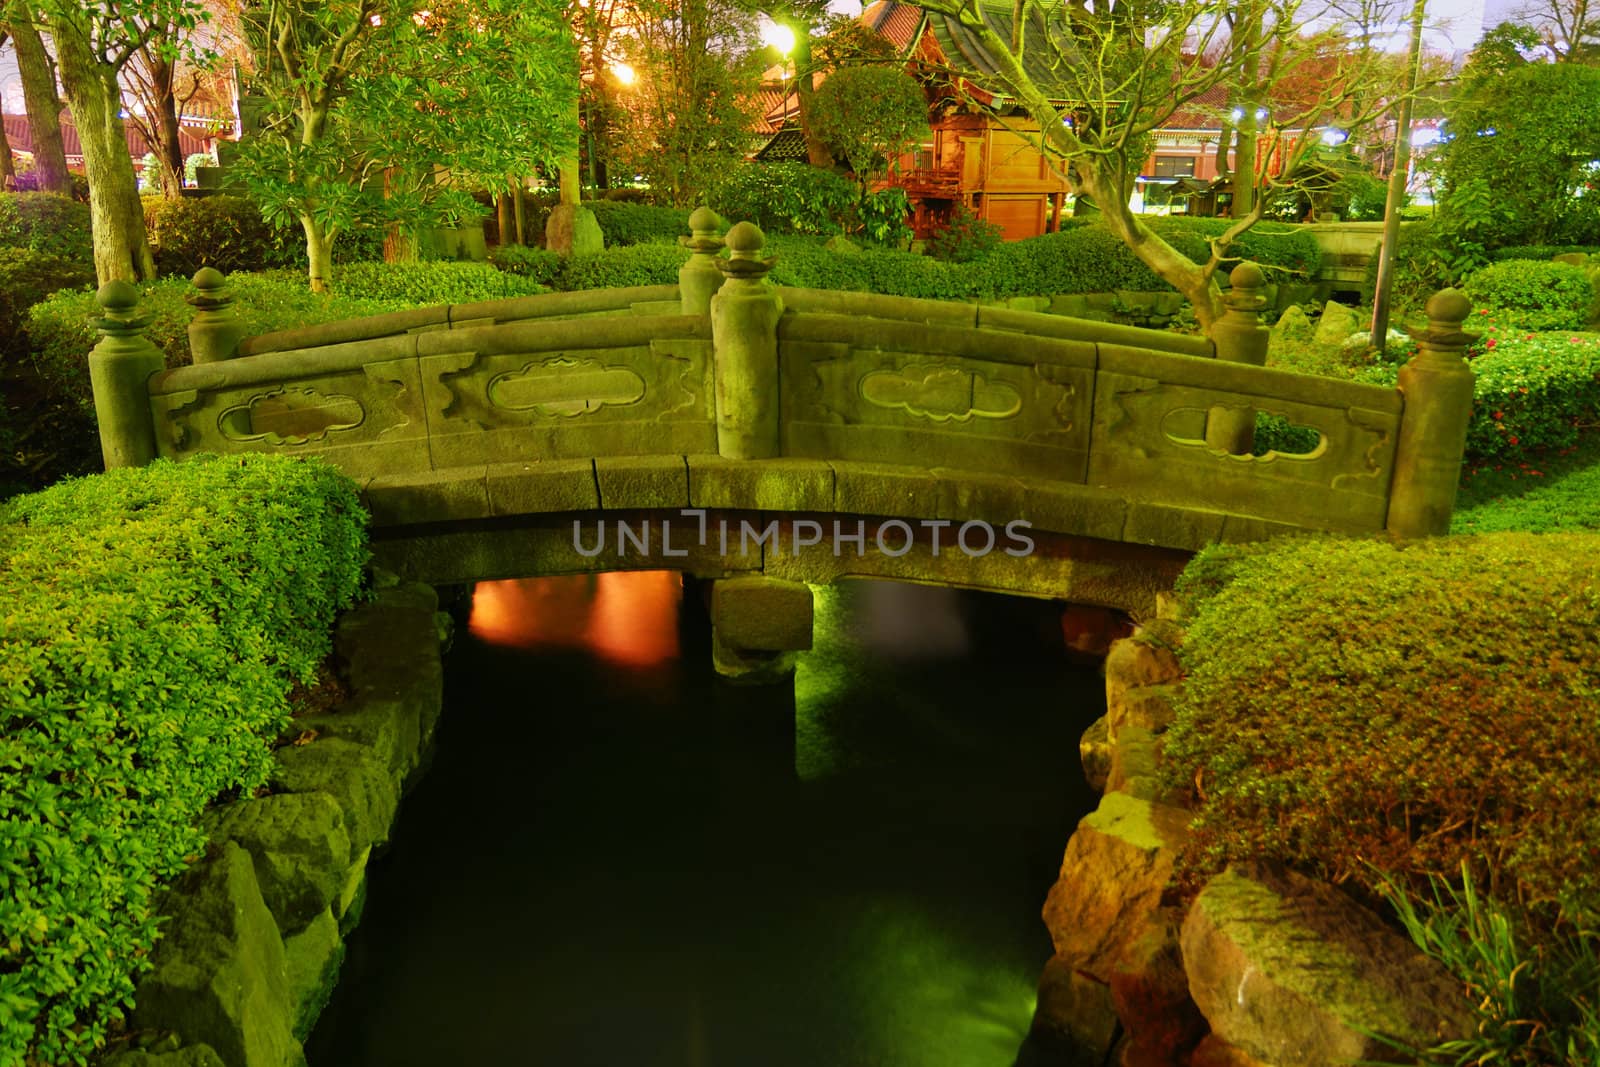  Japanese garden by night with traditional bridge over water pond at Asakusa, Tokyo, Japan